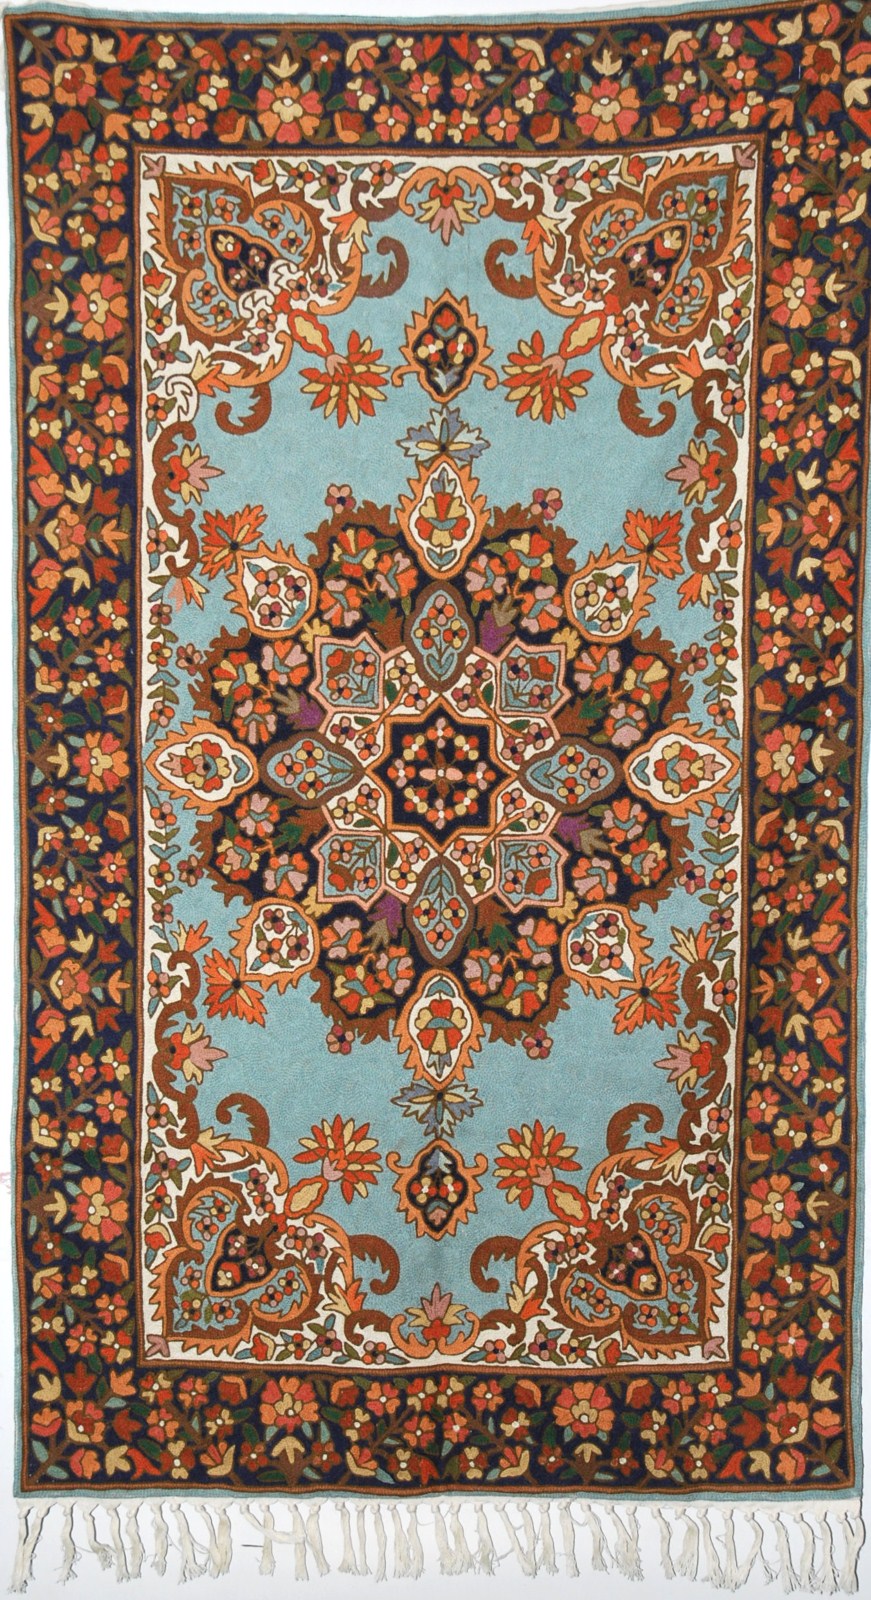 Kashmiri Wool Tapestry Area Rug, Multicolor Embroidery 3x5 feet #CWR15127